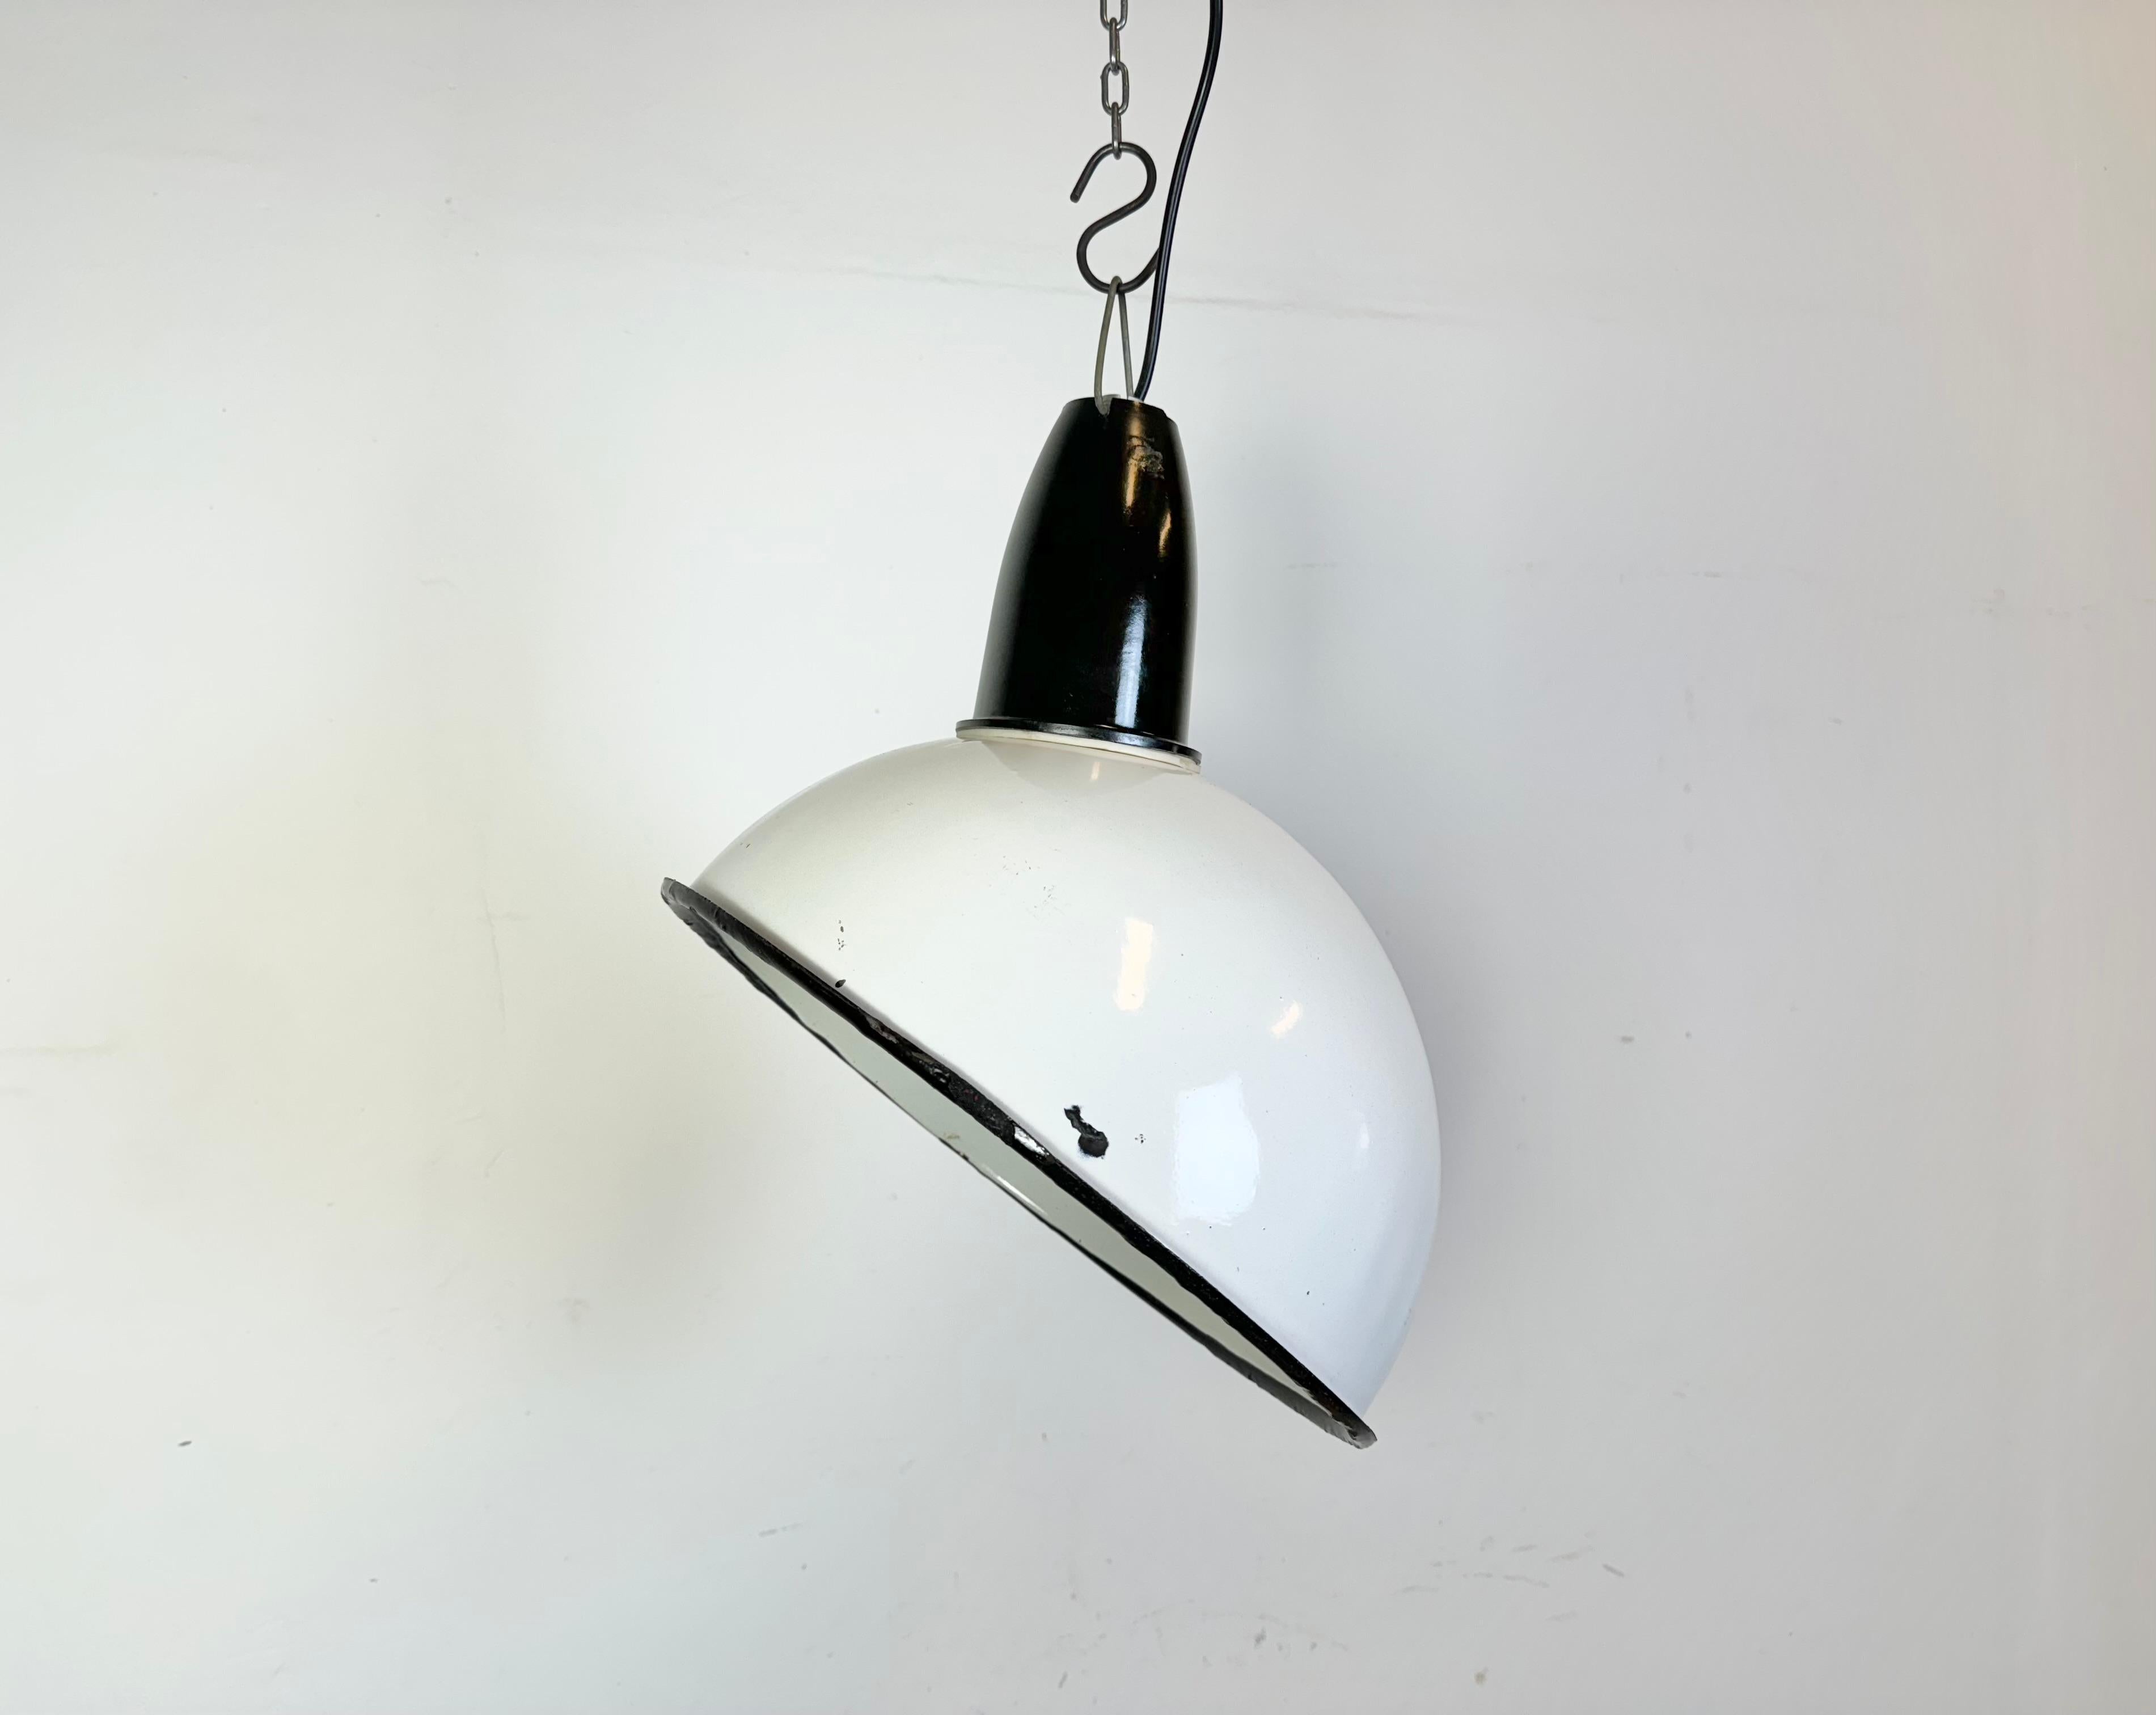 - Vintage Industrial factory light from the 1960s 
- Made in Ukraine in former Soviet Union
- White enamel shade
- Bakelite top 
- Socket requires standard E27/ E26 lightbulbs 
- New wire 
- Lampshade diameter: 34 cm
- Weight : 2 kg.